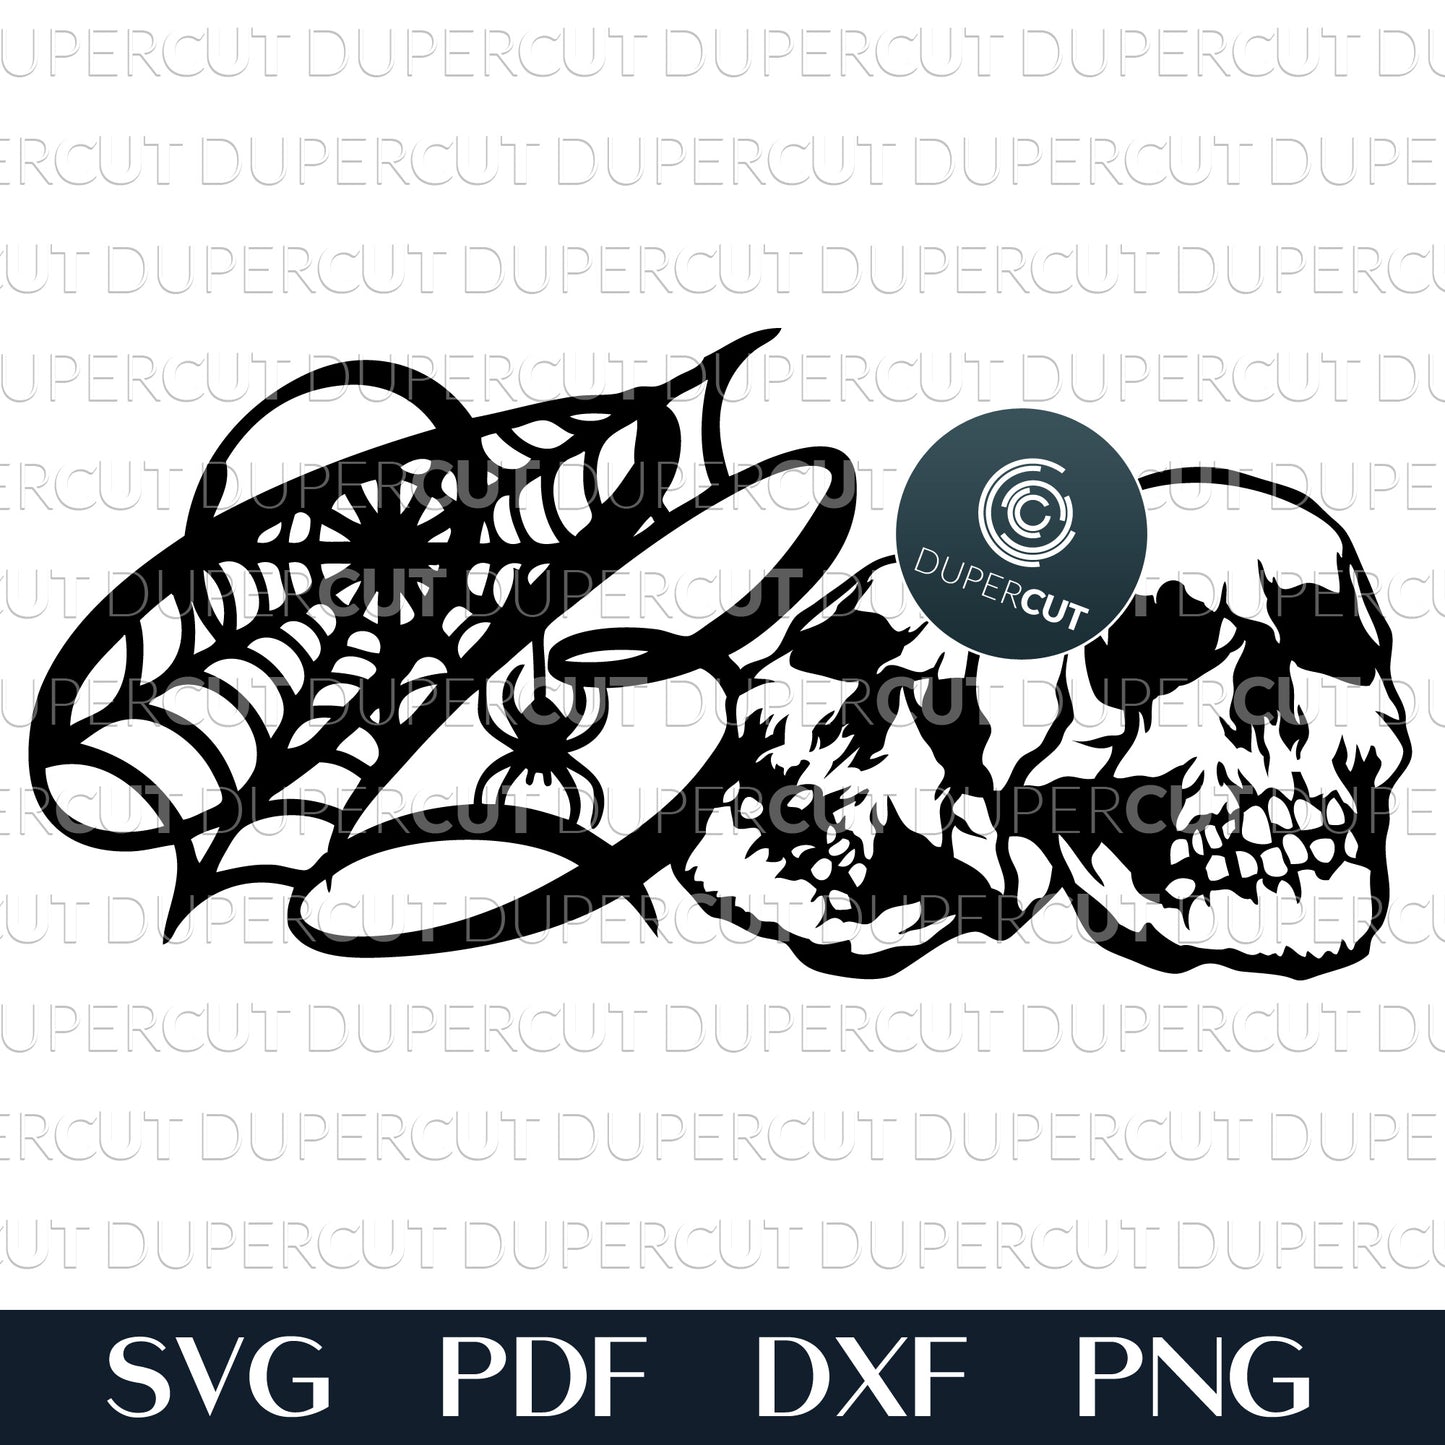 Boo skulls with spider web SVG PDF DXF commercial use vector files for laser cutting, engraving, printing, sublimation, Glowroge, Cricut and CNC plasma machines.